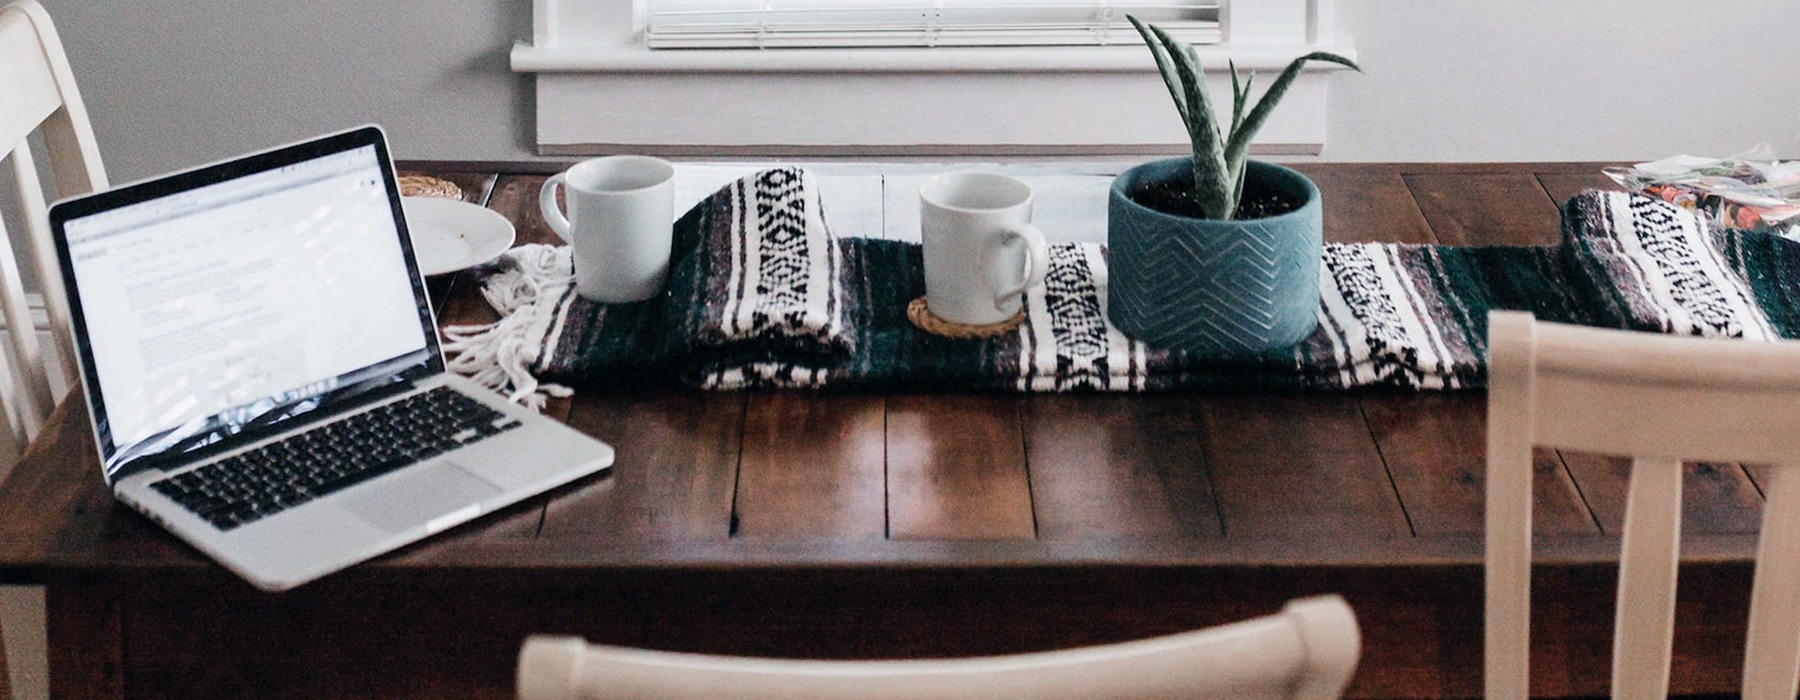 cozy table with computer and coffee mugs, plant, and blanket